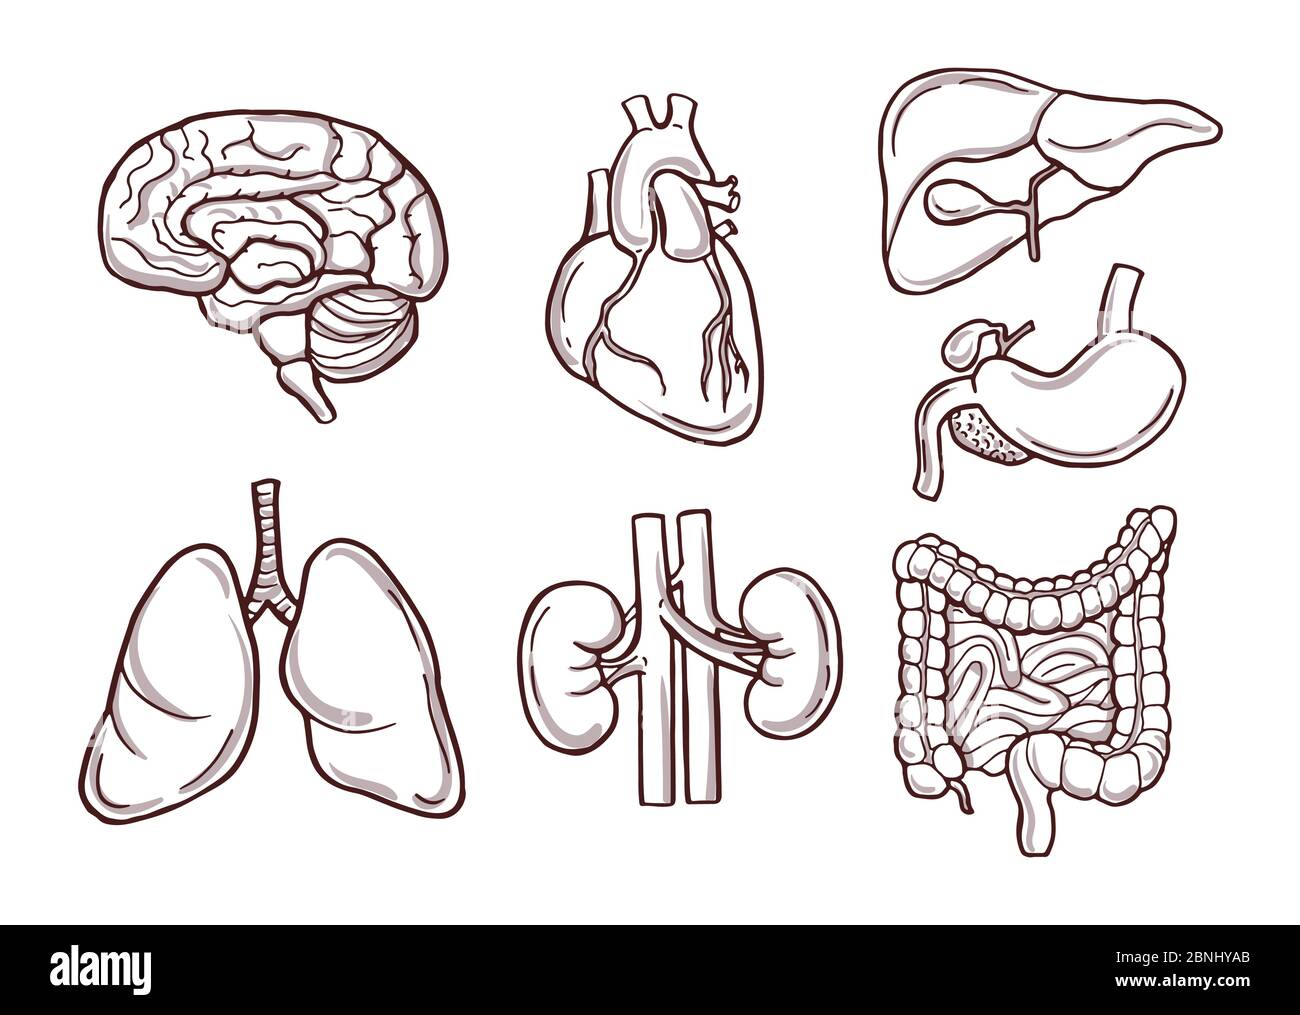 Hand drawn illustration of human organs. Medical pictures Stock Vector